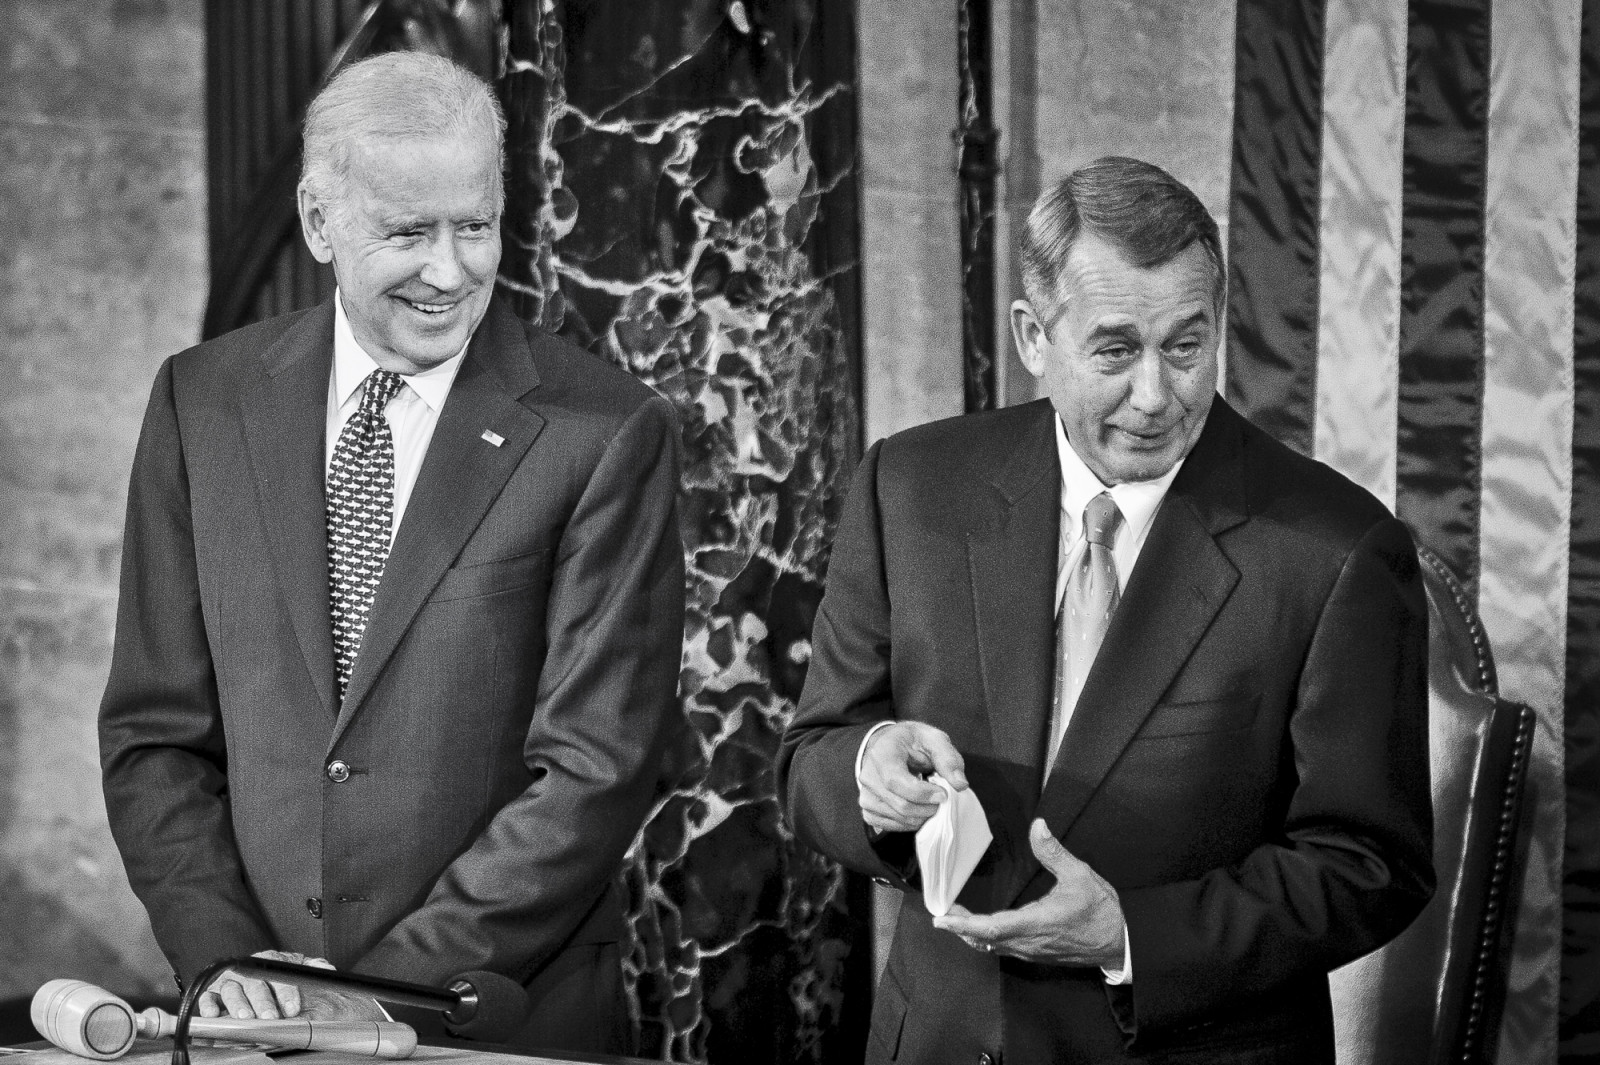 Vice President Joe Biden looks on as Speaker of the House John Boehner shows that he has a handkerchief ready for any tears he may shed as Pope Francis speaks to a joint meeting of Congress at the U.S. Capitol in Washington, District of Columbia, U.S., on Thursday, Sept. 24, 2015. Credit: Pete Marovich/Bloomberg